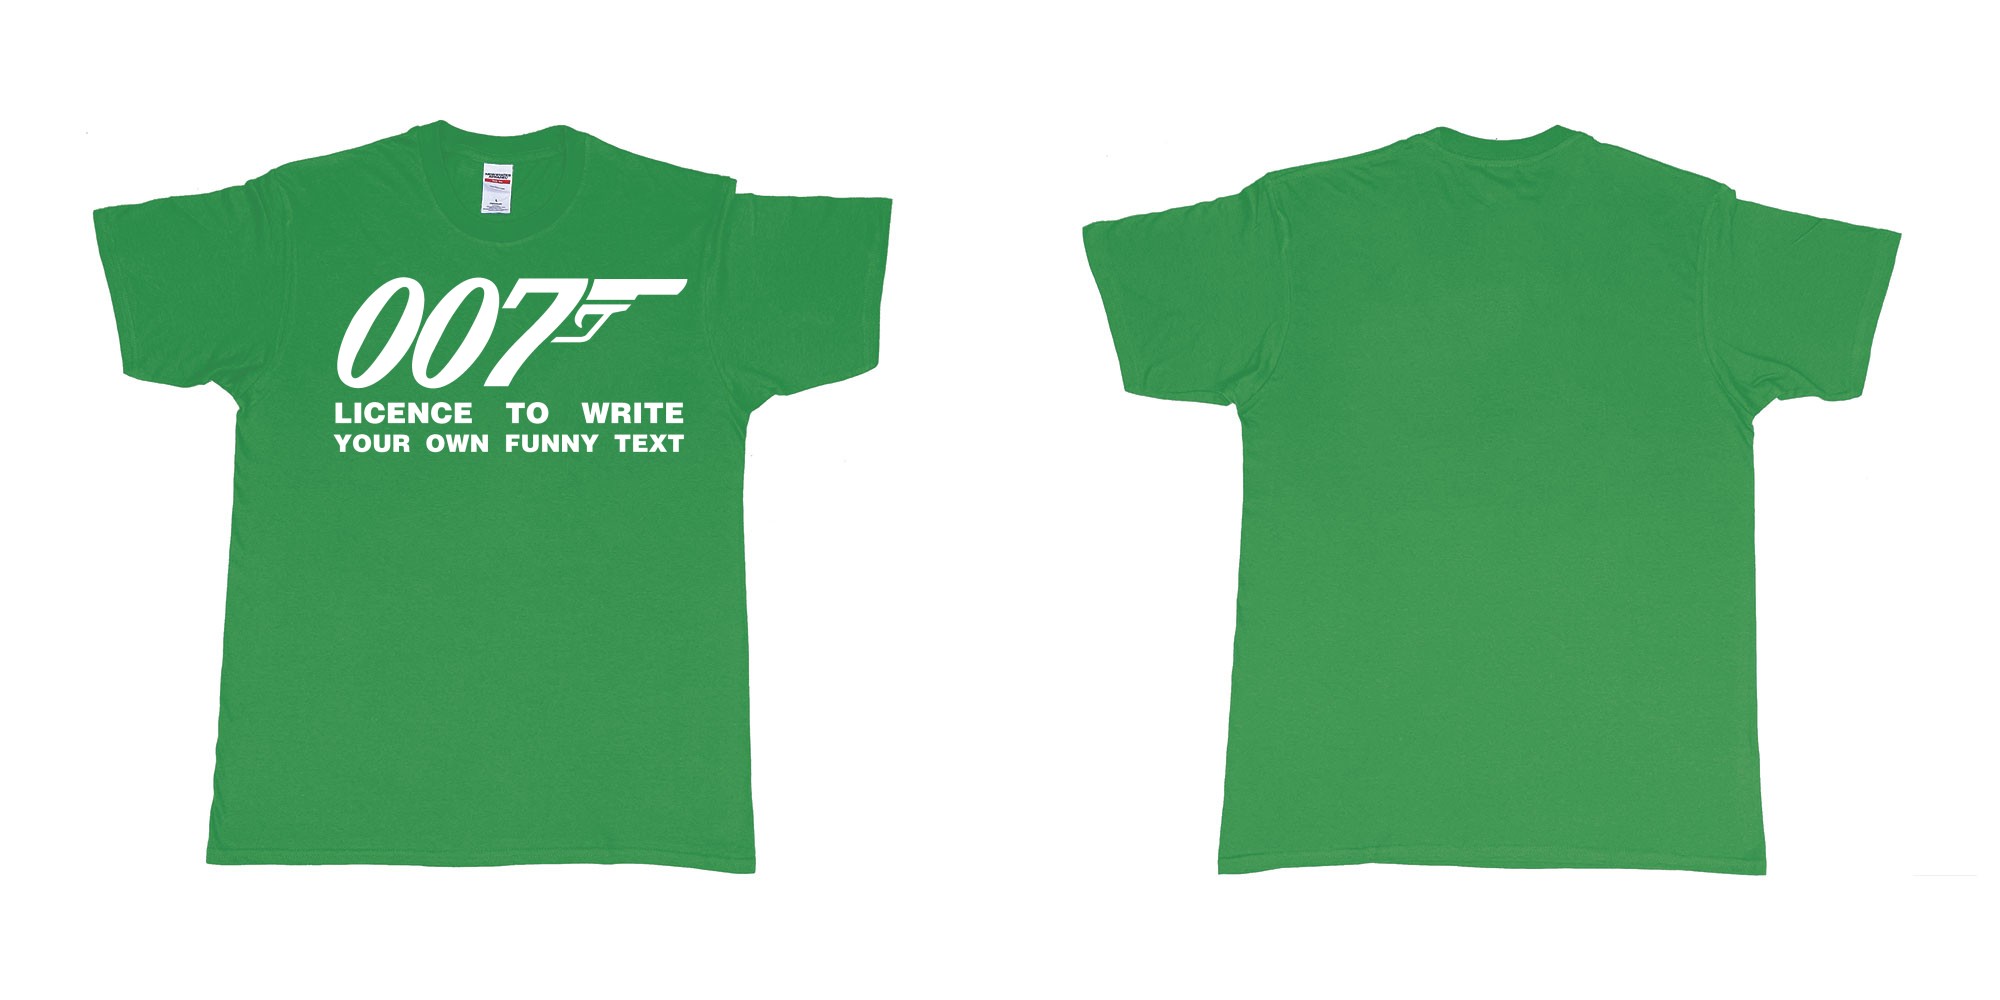 Custom tshirt design james bond logo licence to write own custom text print in fabric color irish-green choice your own text made in Bali by The Pirate Way